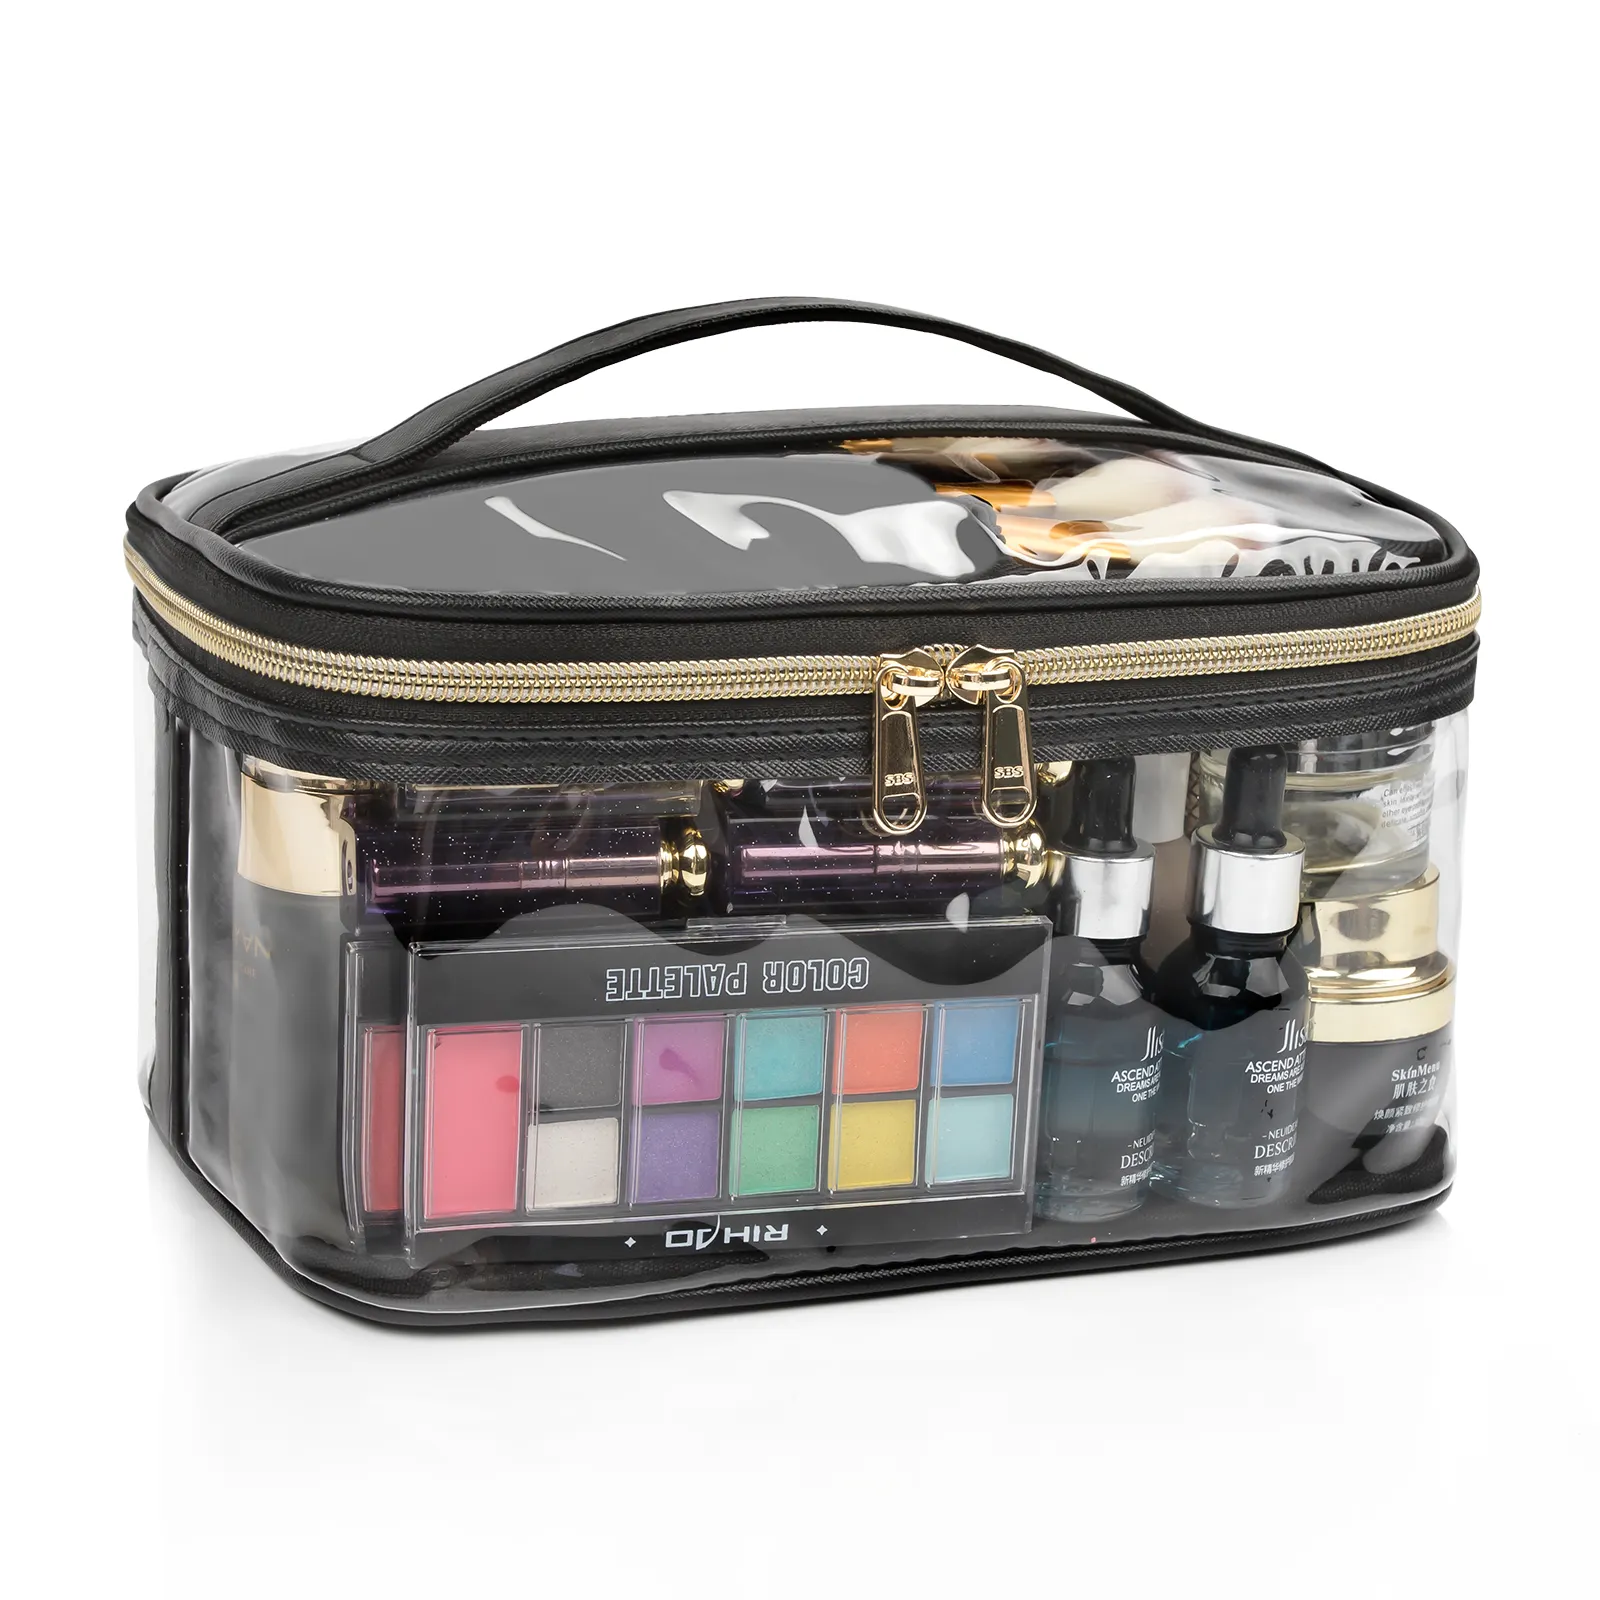 Relavel Clear Makeup Organizer Case Portable Plastic PVC Cosmetic Bags Transparent Makeup Bag for Traveling Storage